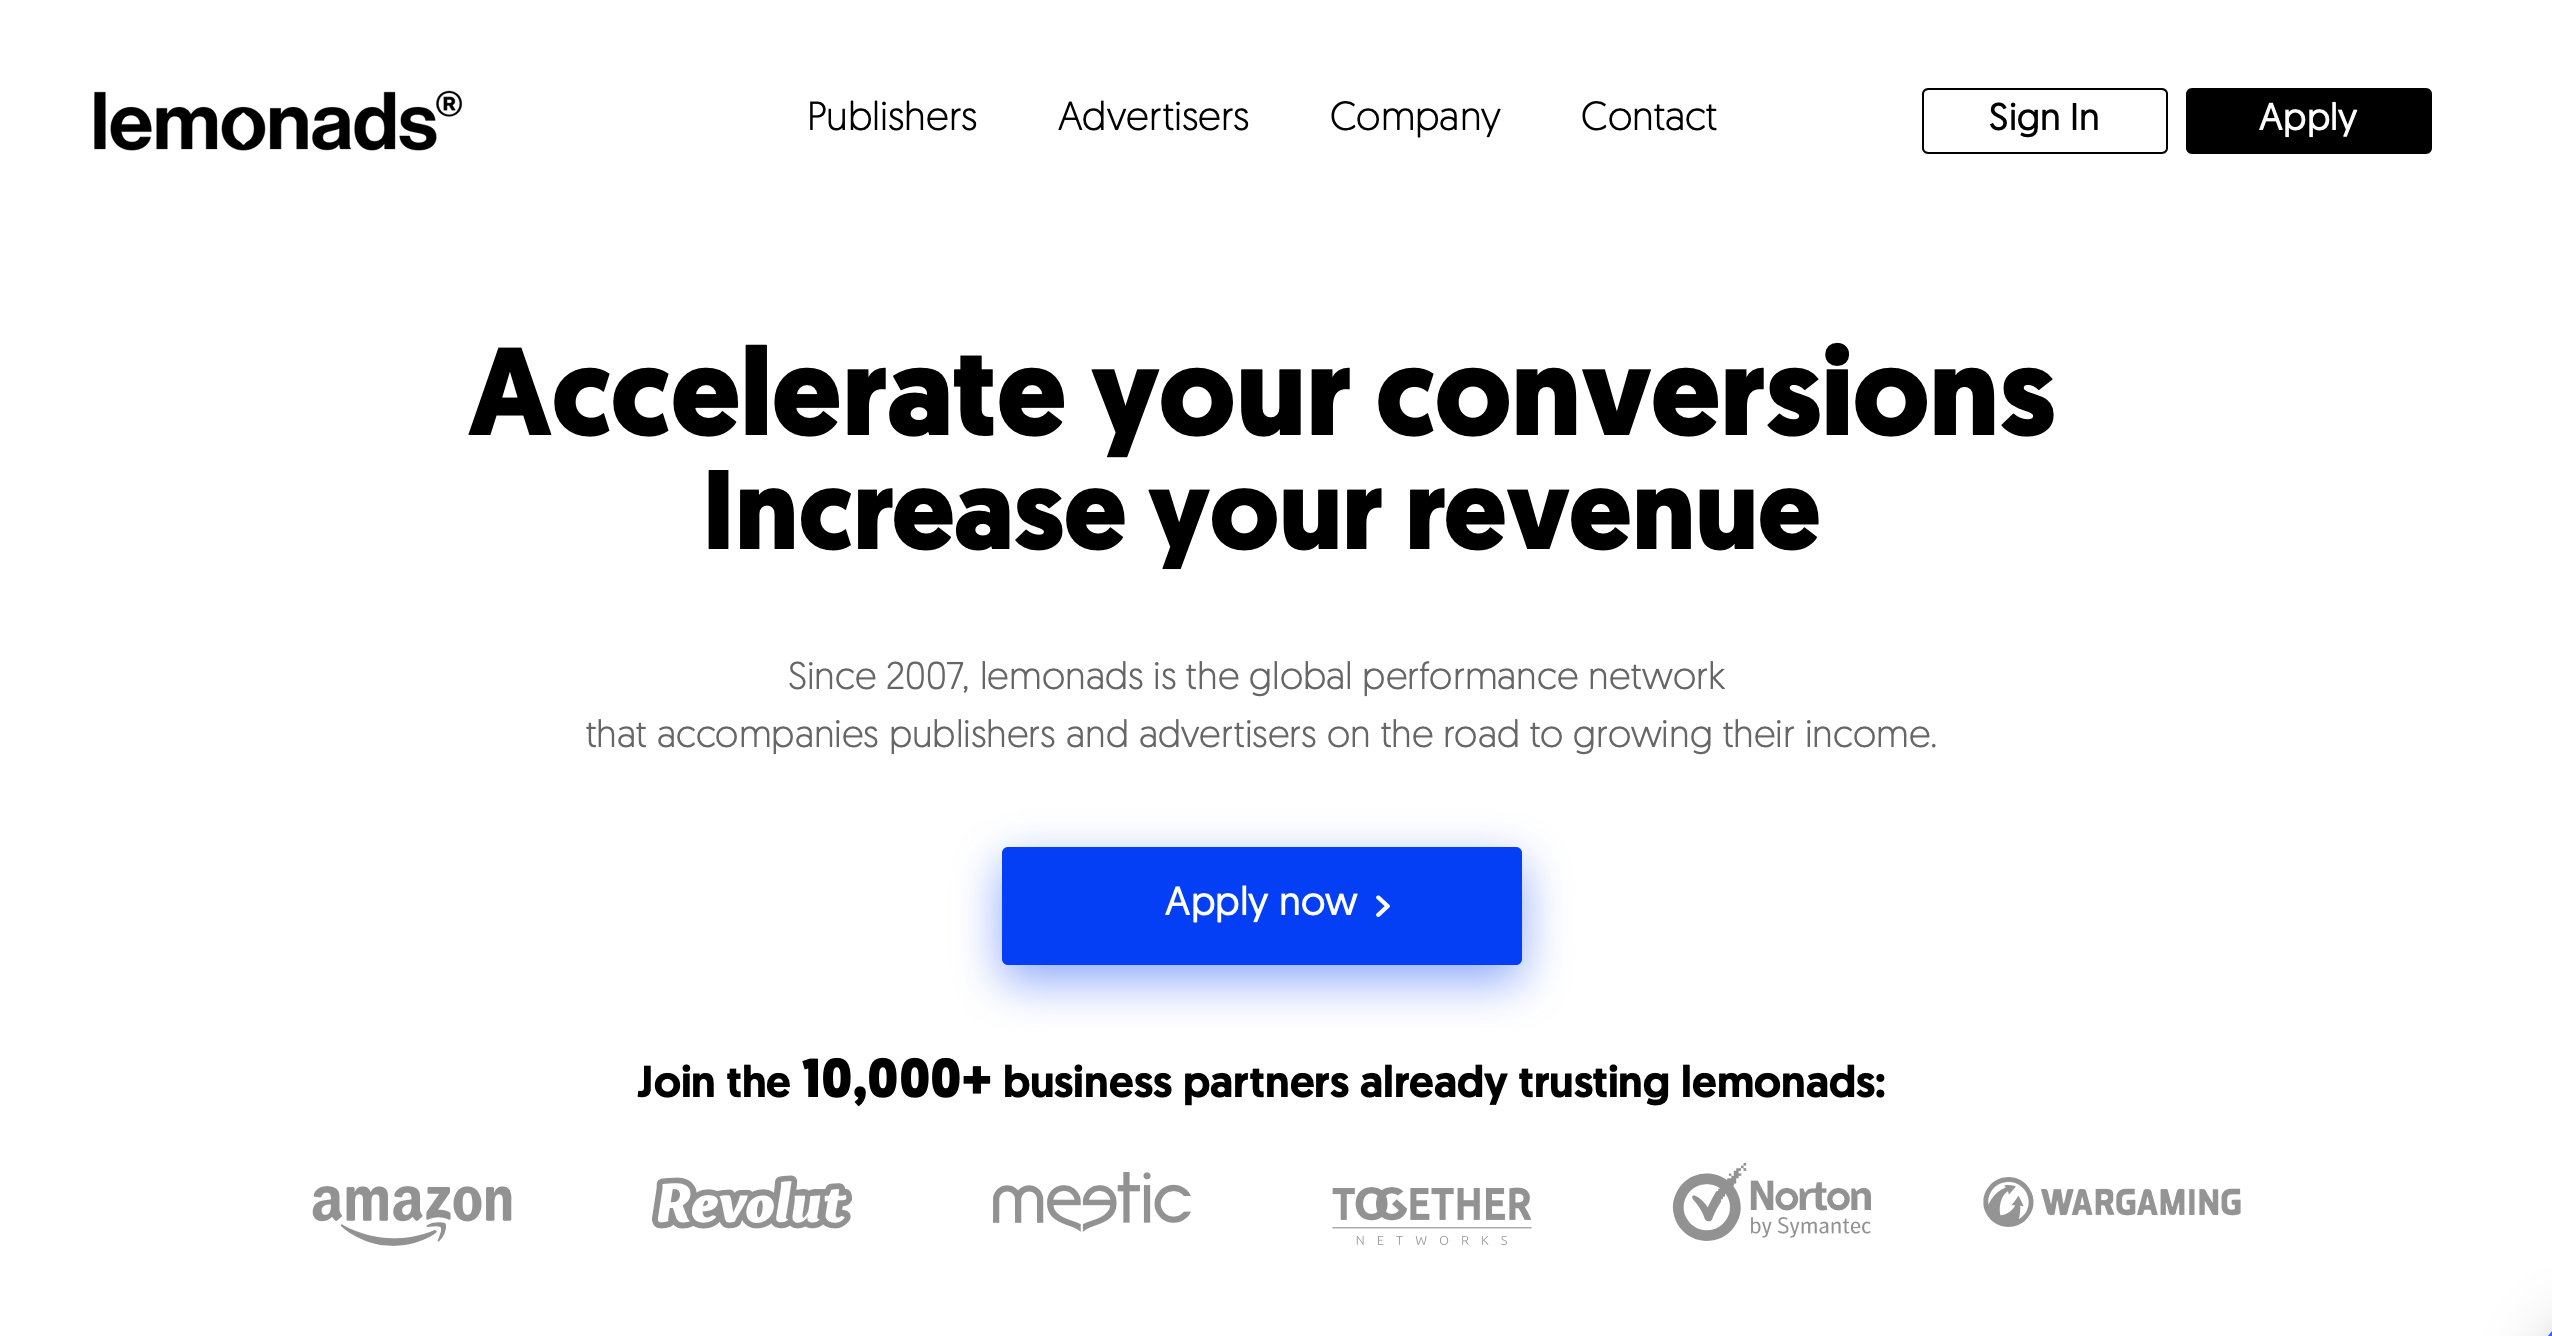 lemonads - Accelerate your Conversions, Increase your Revenue with lemonads